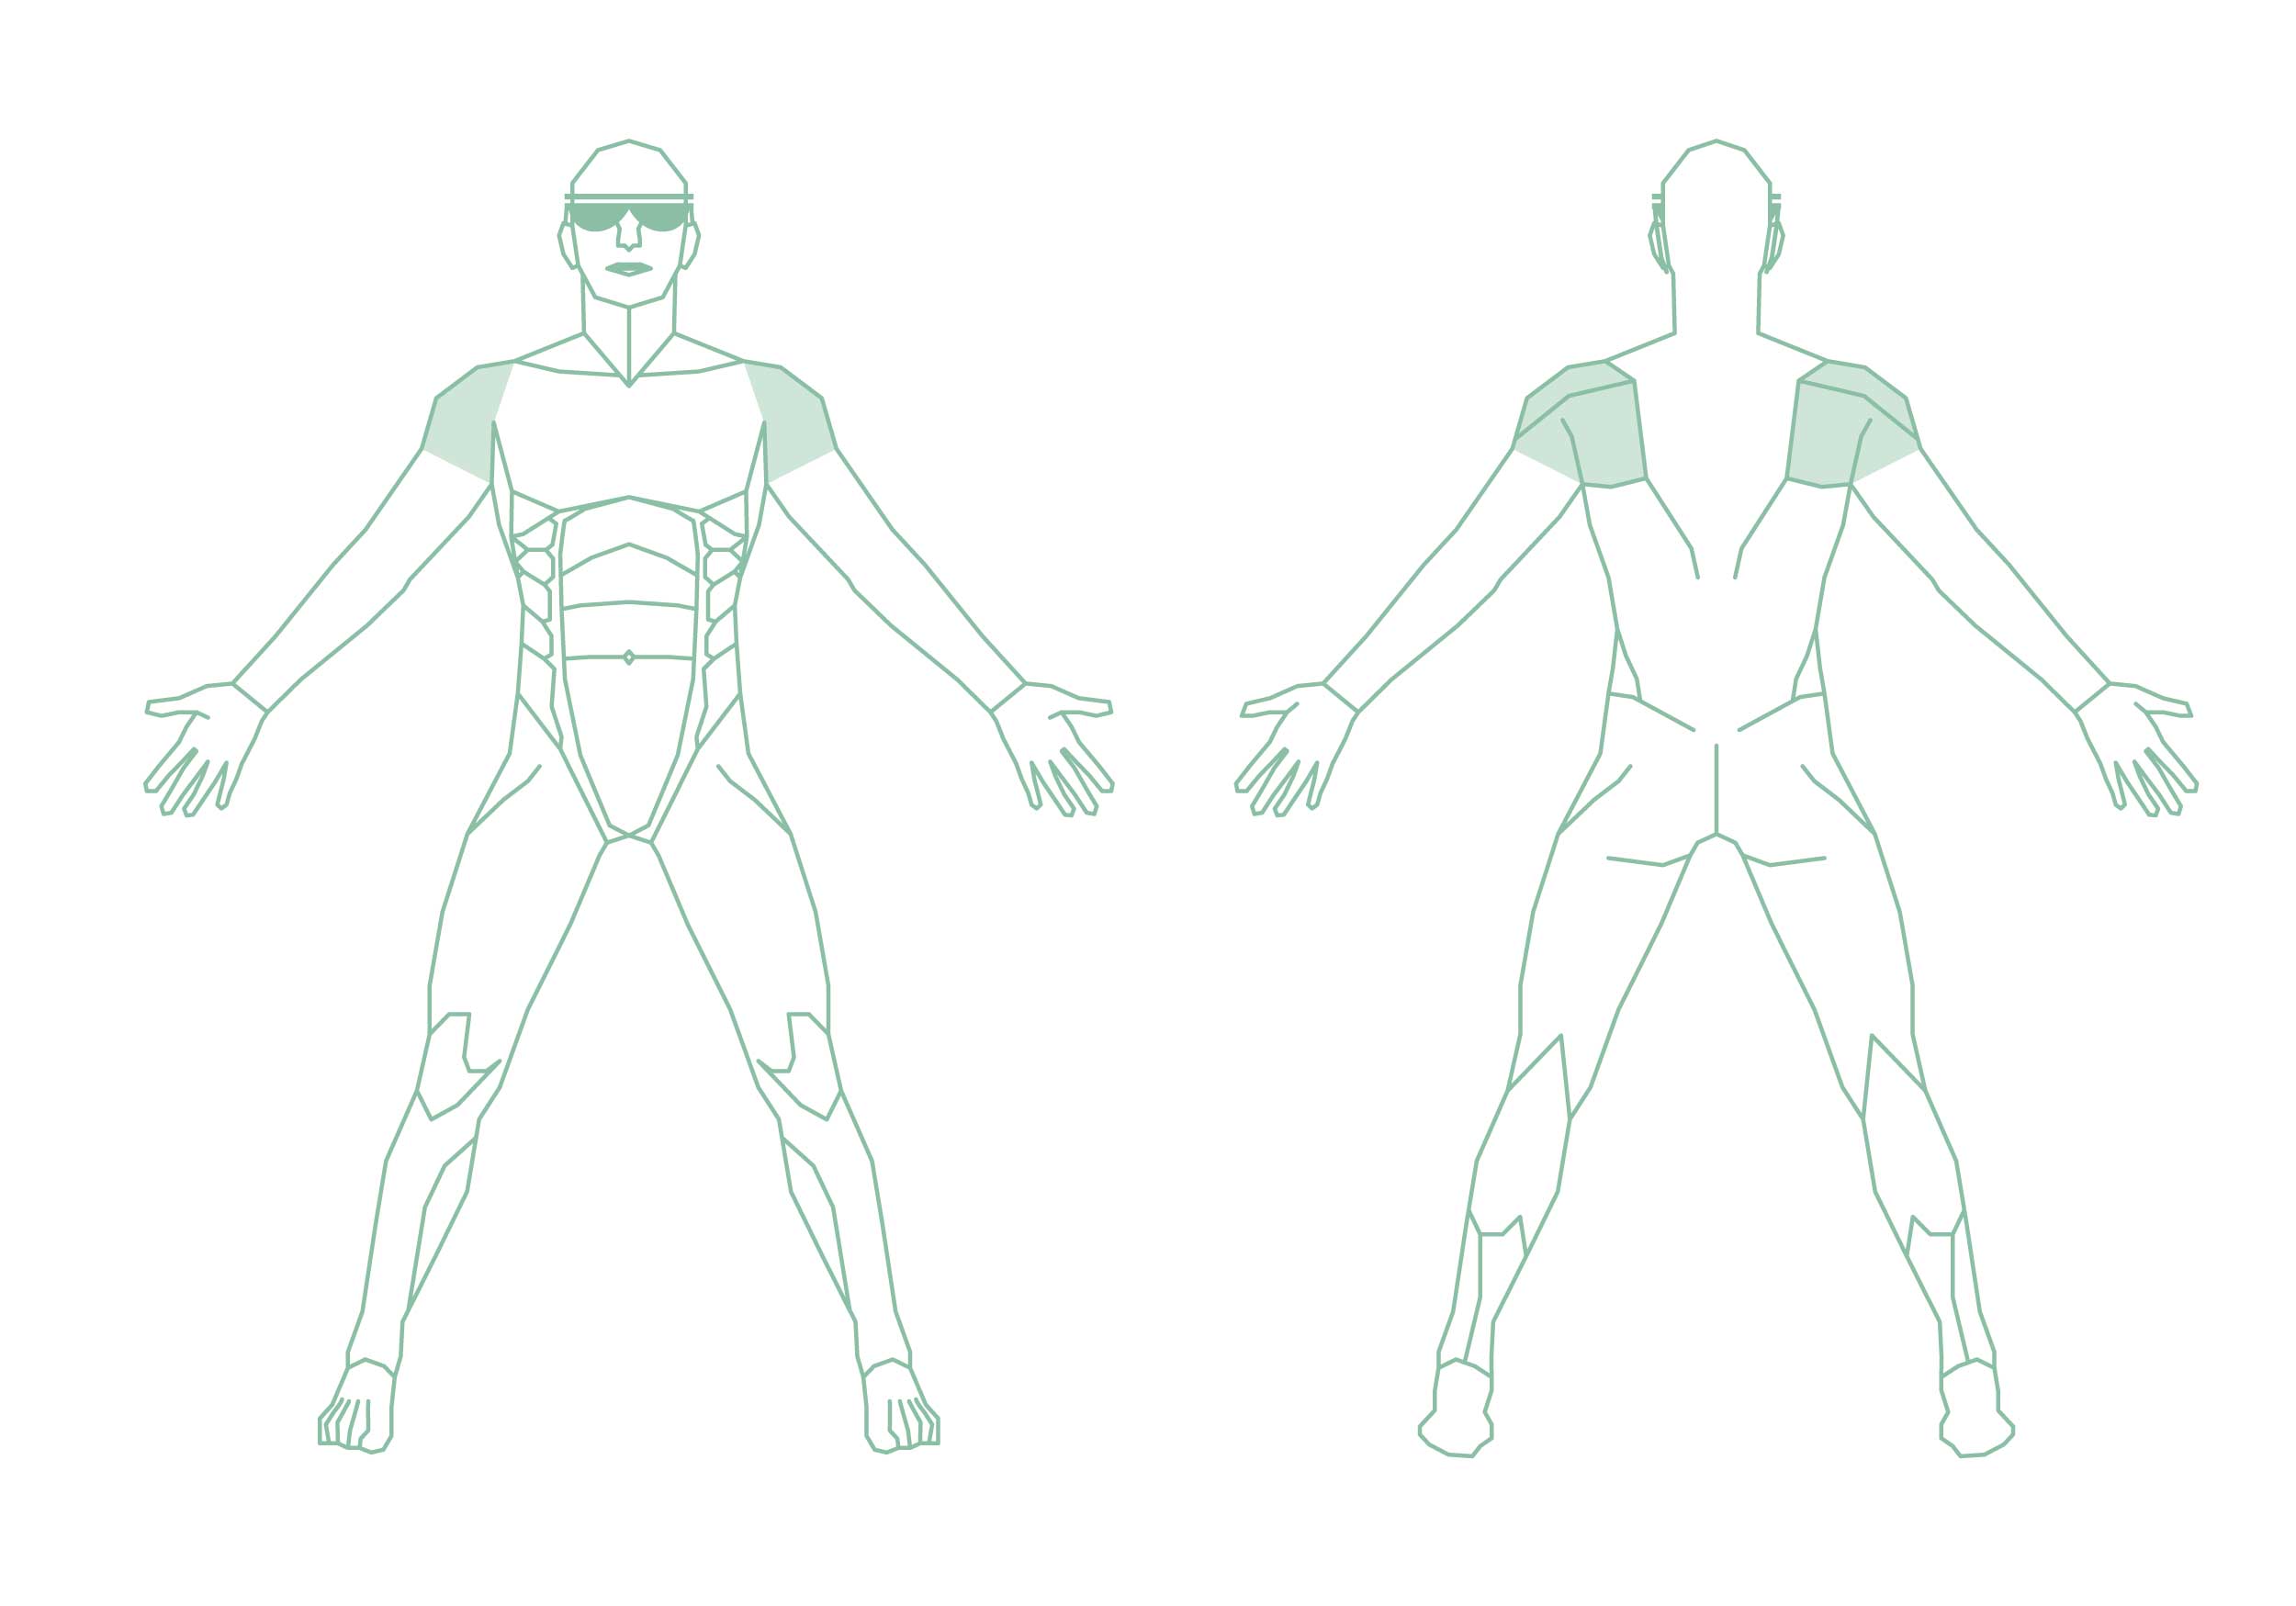 Illustration of a person with the visibly demarcated body regions shoulders